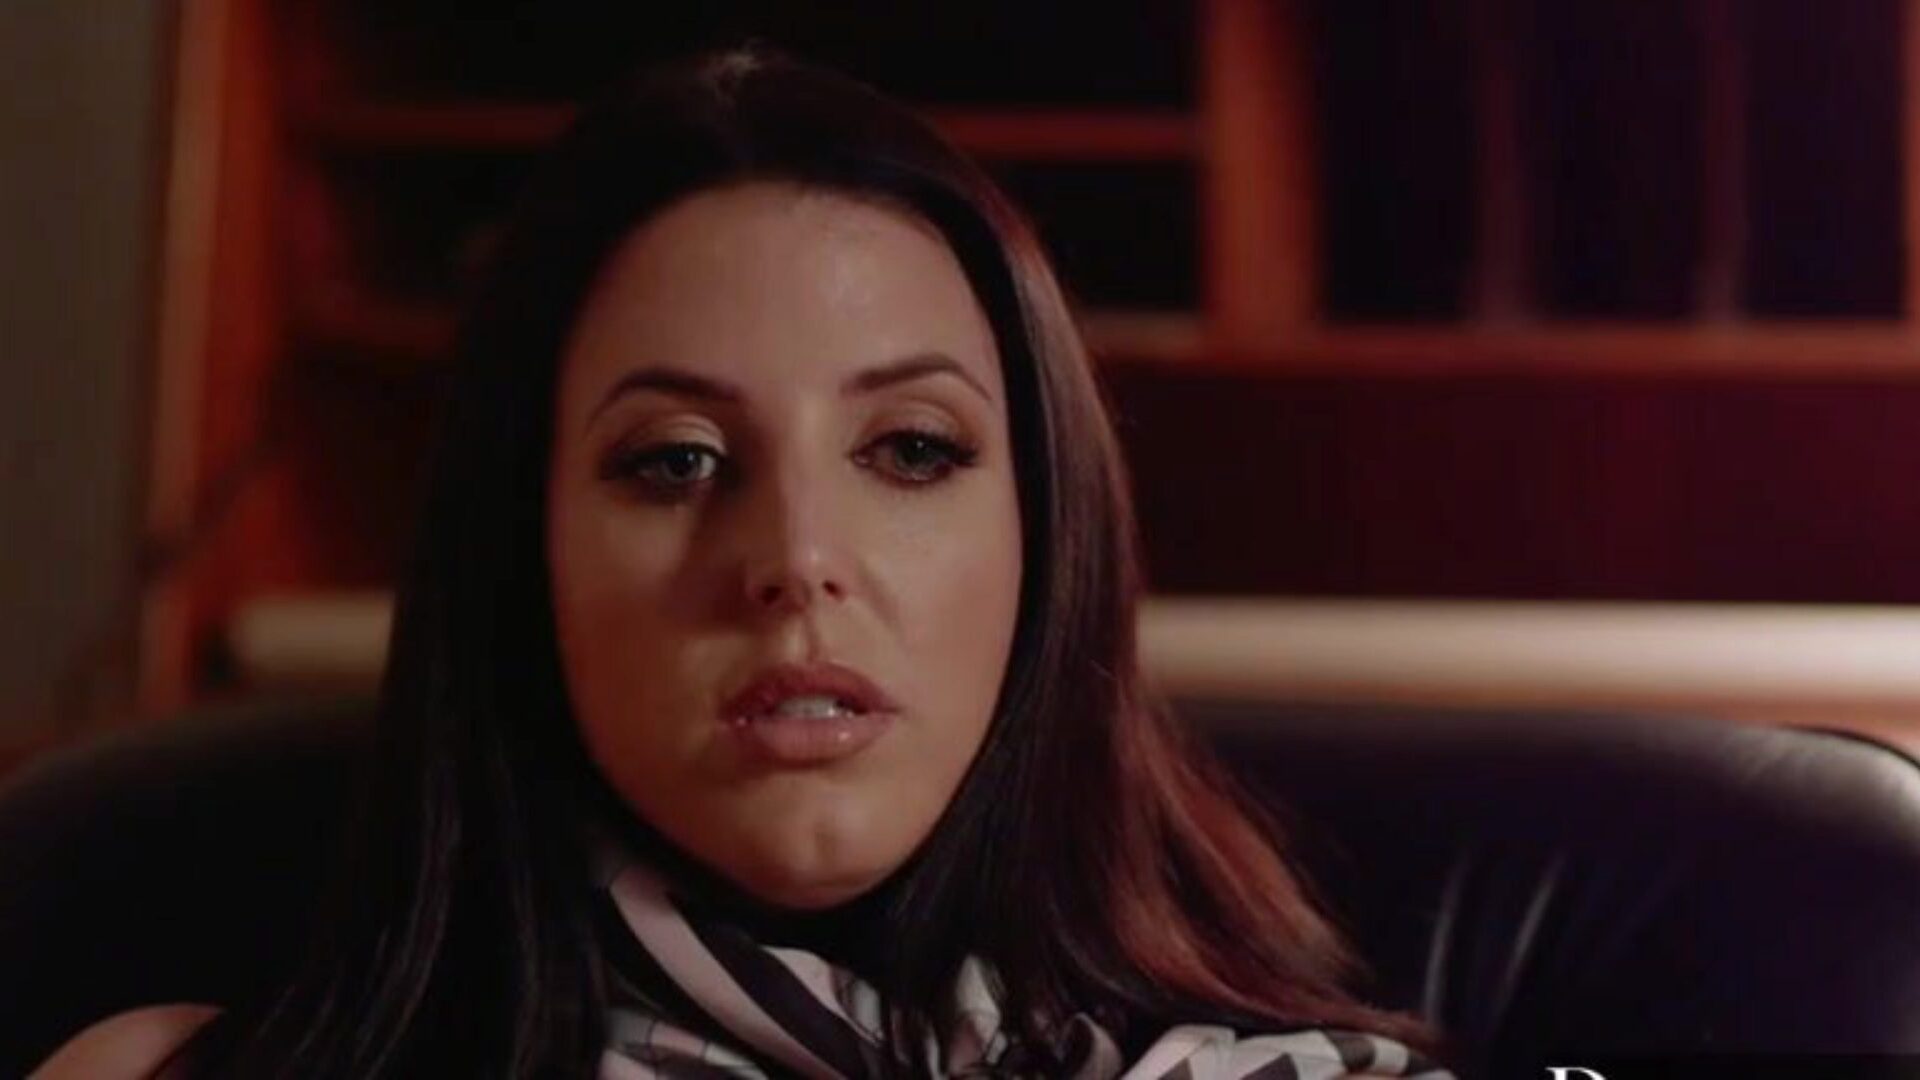 Autumn Falls & Lena Paul & Angela White & Holy Fuck! The story of this XXX Episode is OF COURSE very important but plumb that: Angela White, Autumn Falls, Lena Paul and Alina Lopez are in the Same Scene! Top Shelf Marangos so many, we decent getting dizzy!